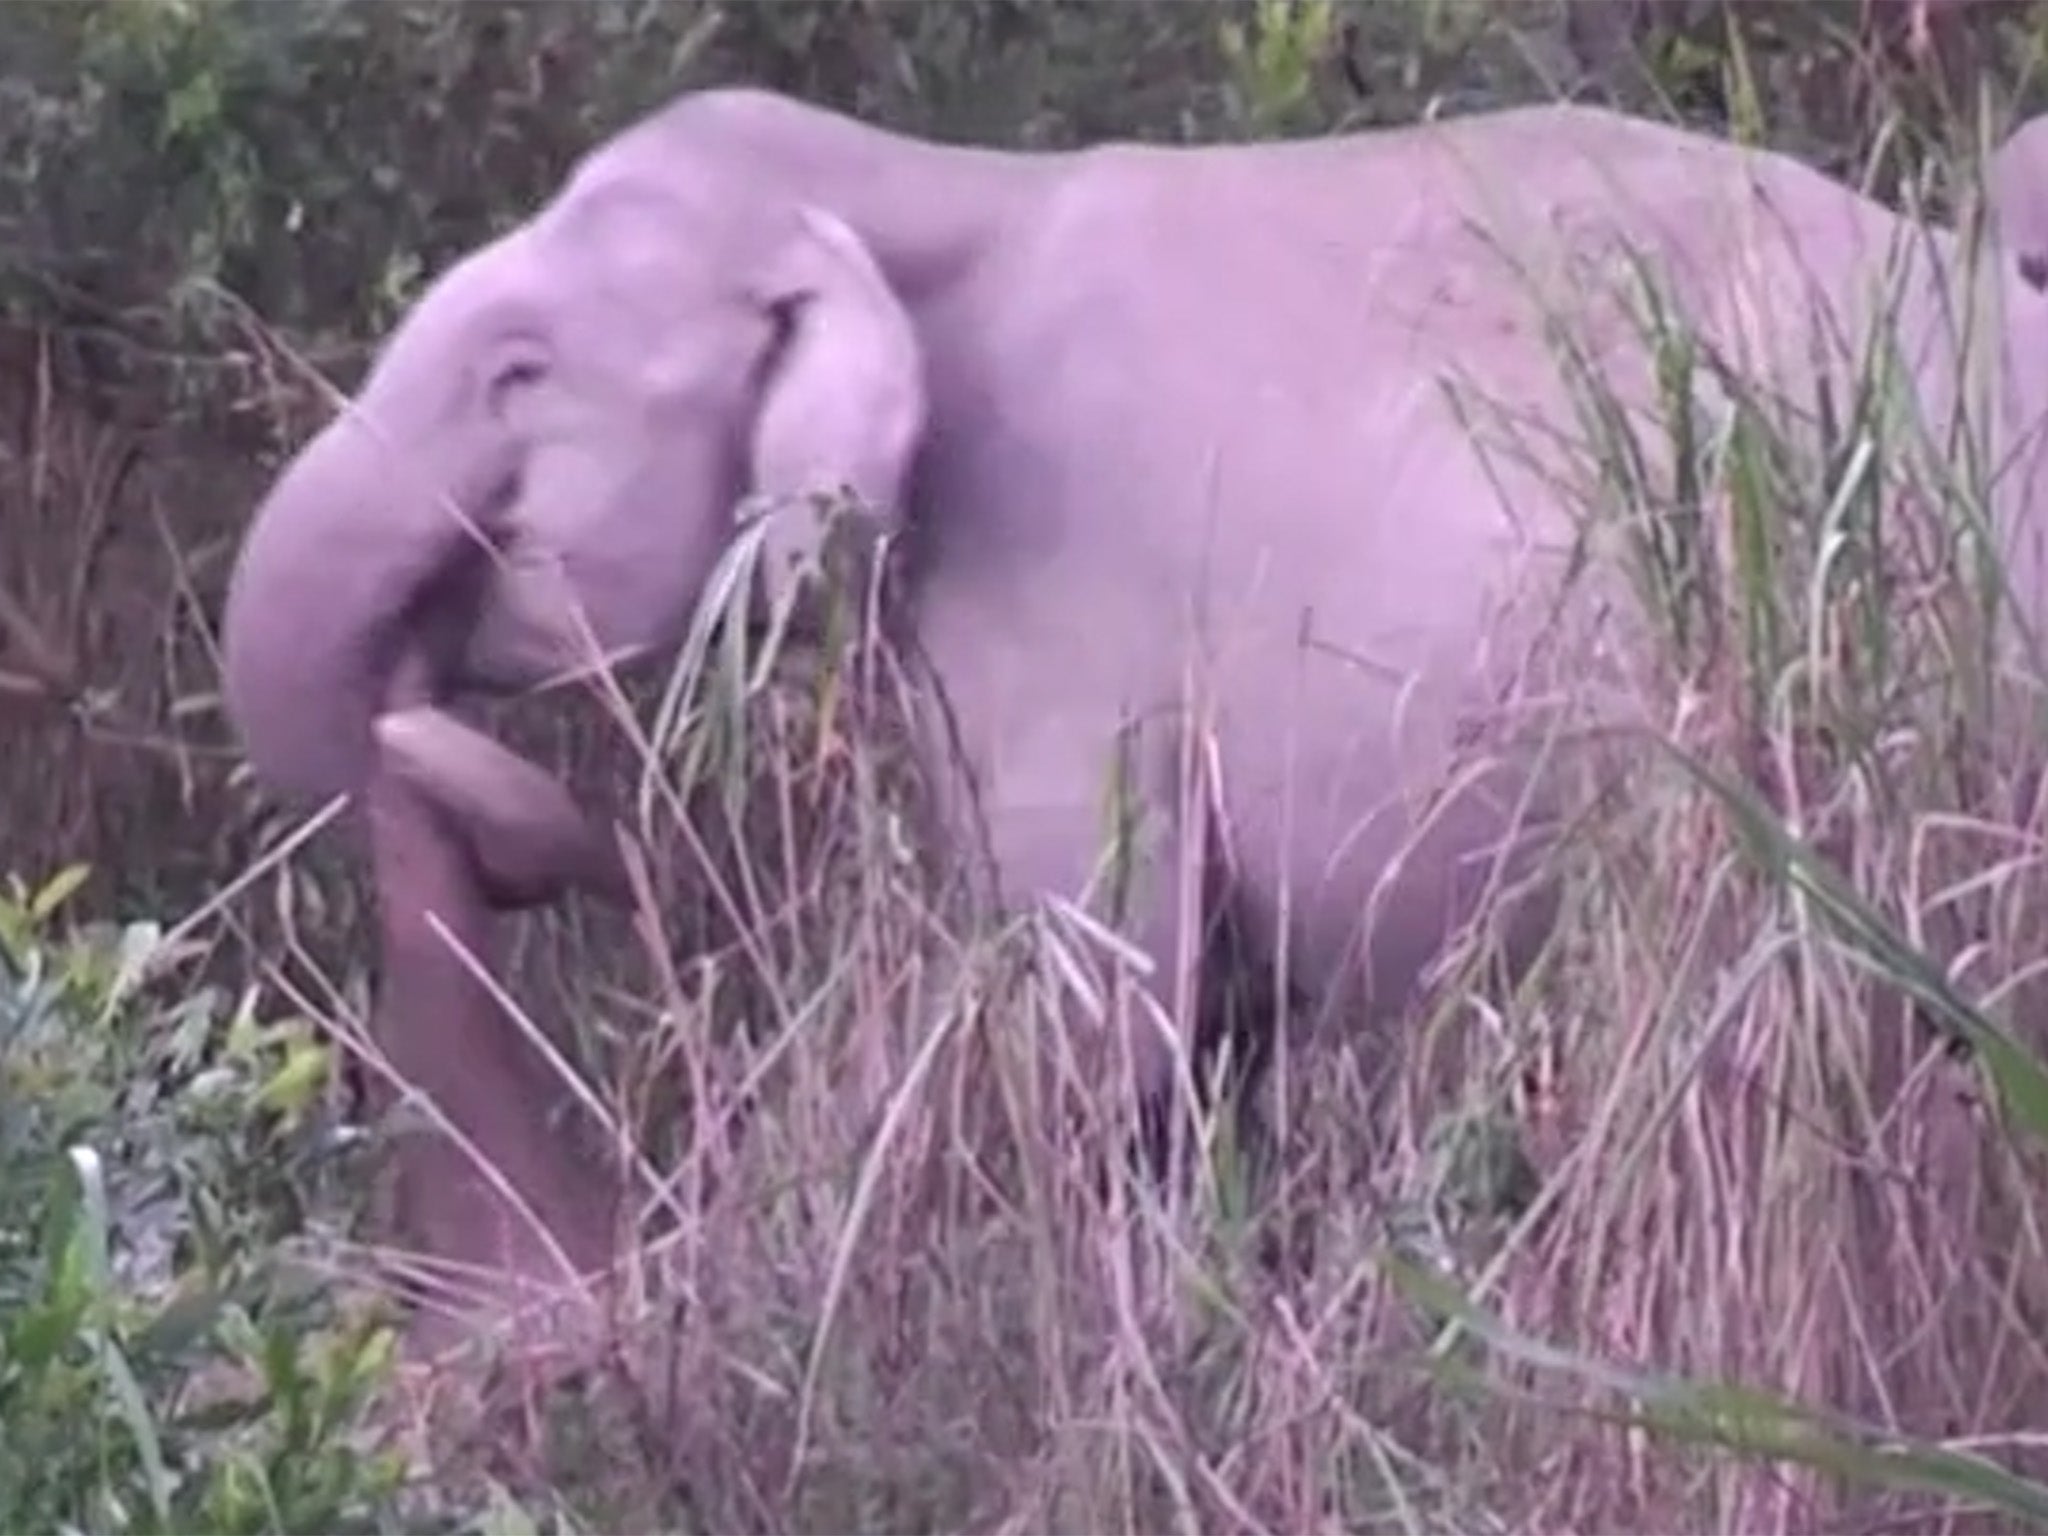 Sseveral female elephants were seen dragging dead young